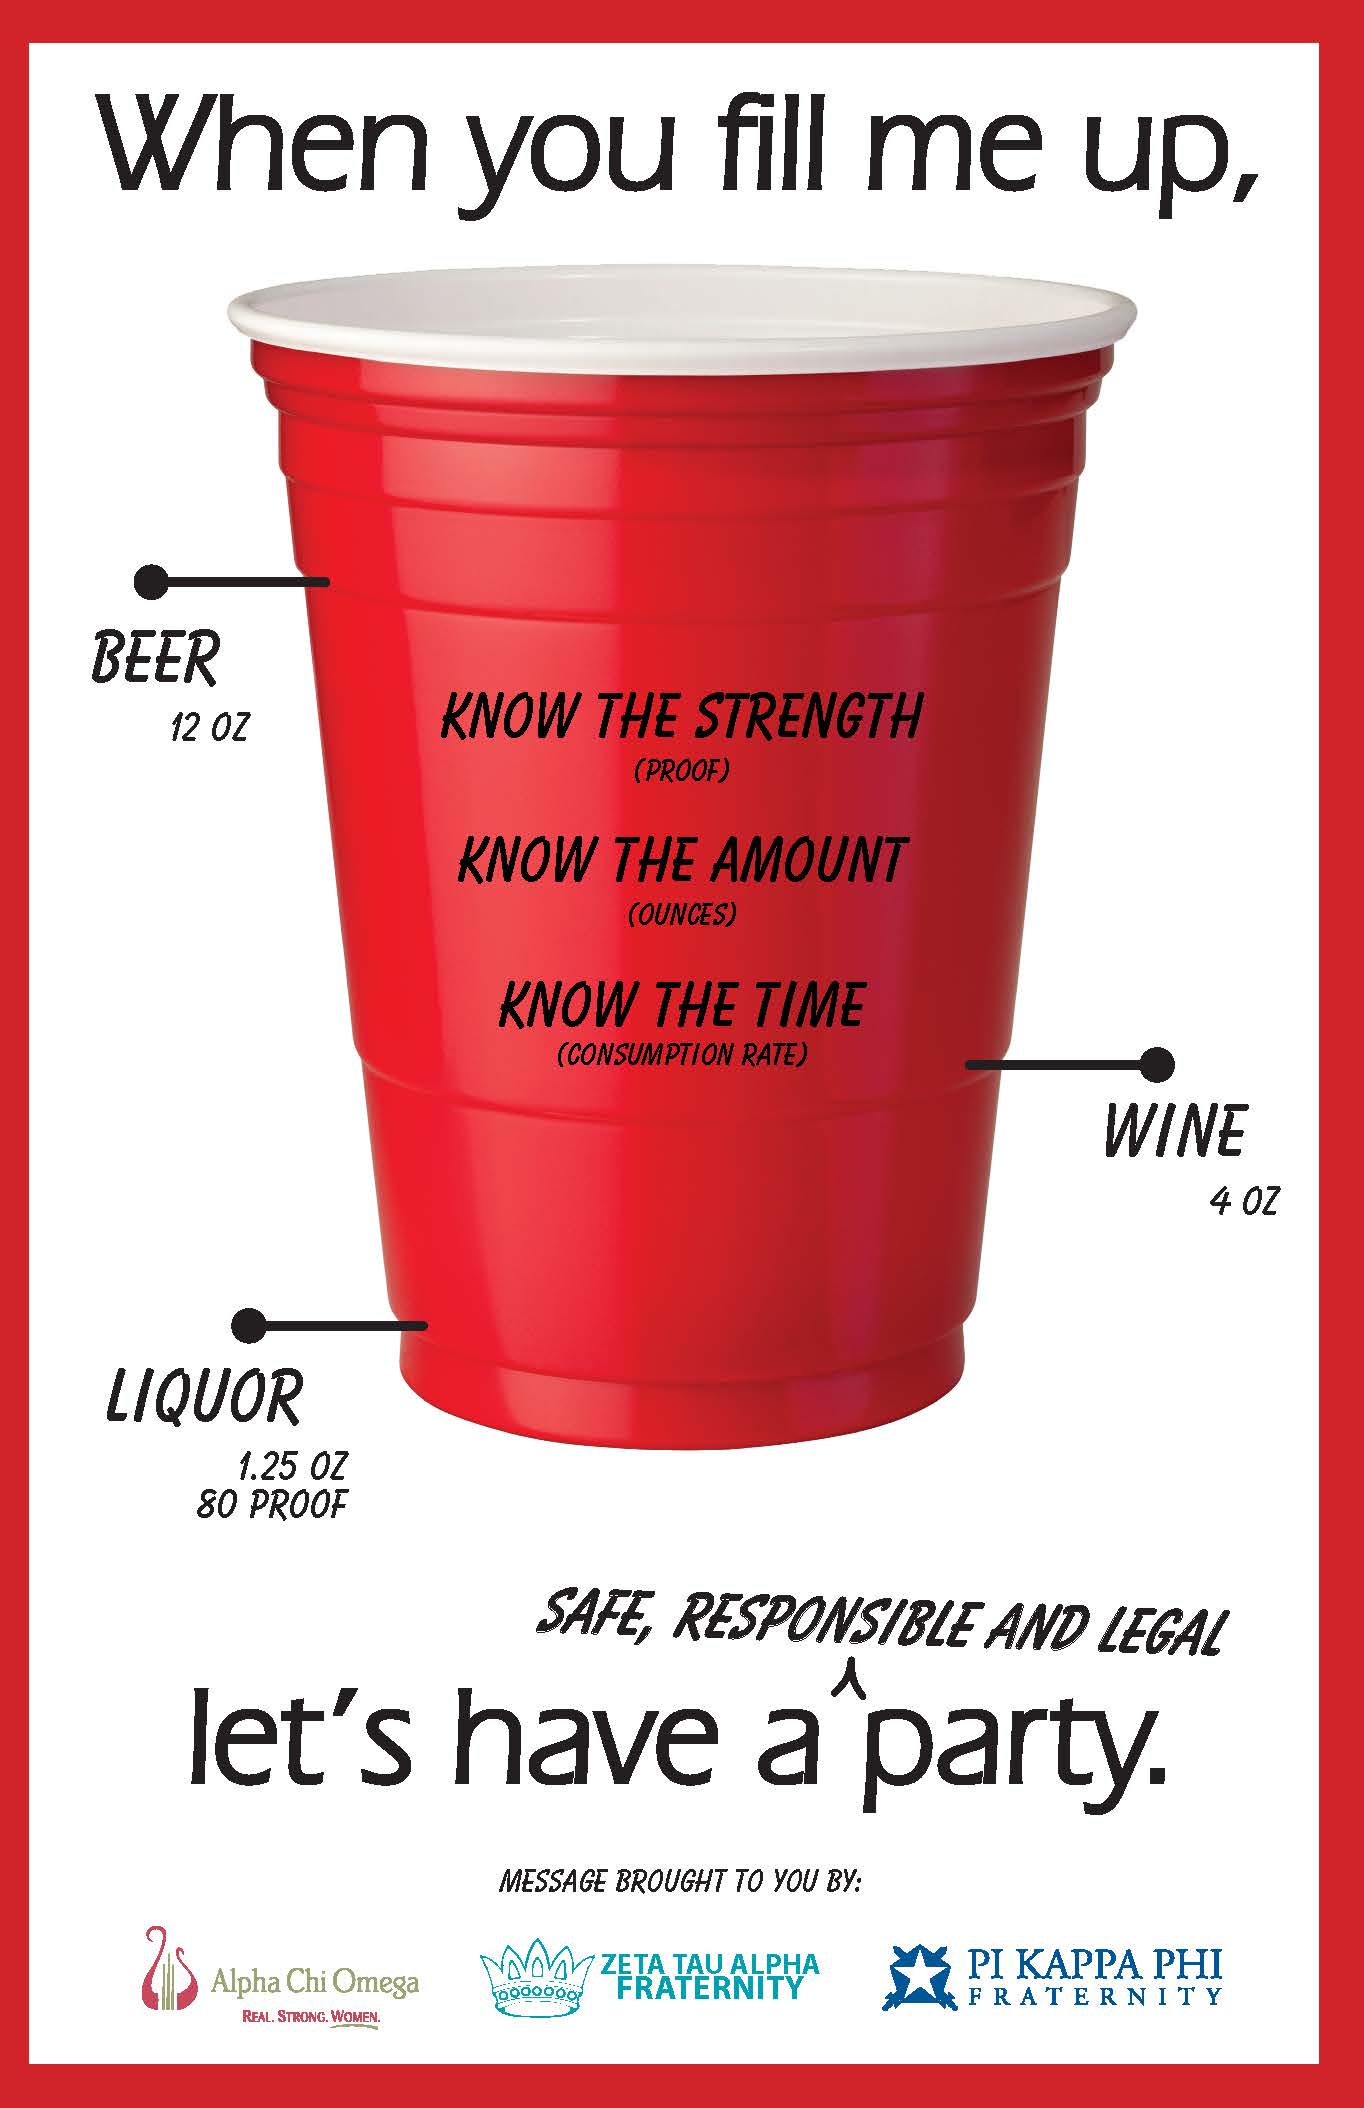 Red Solo Cup